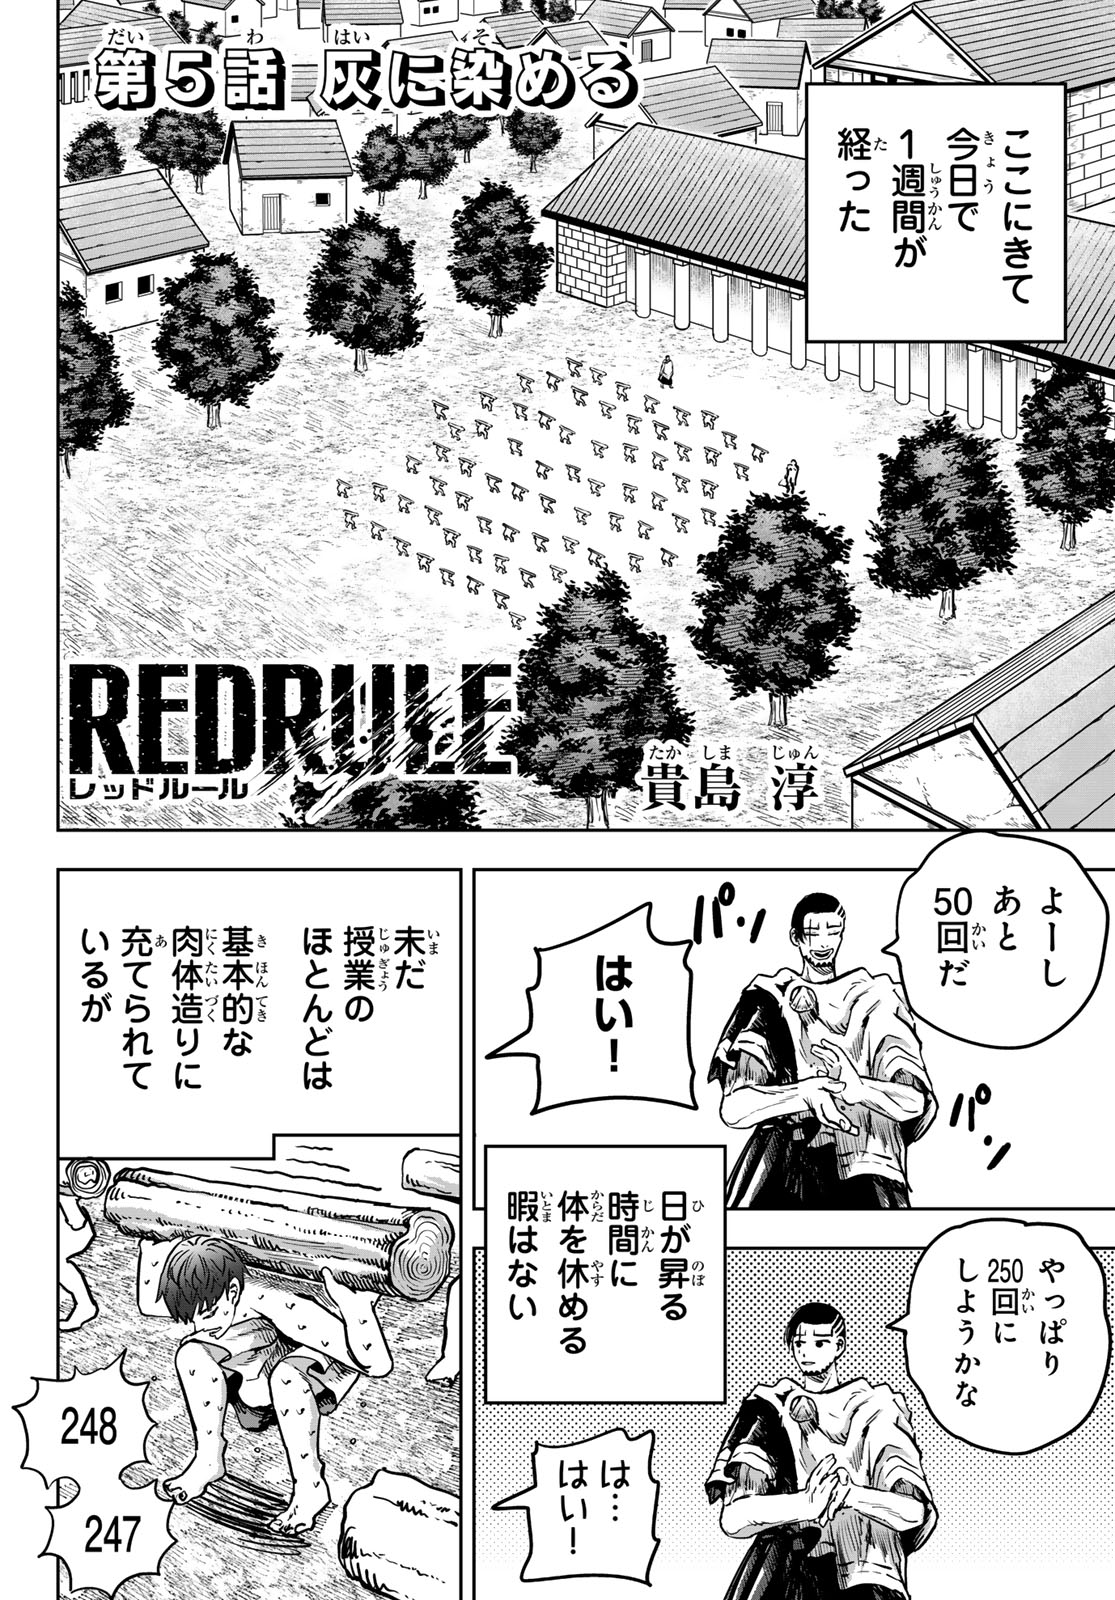 Red Rule 第5話 - Page 2